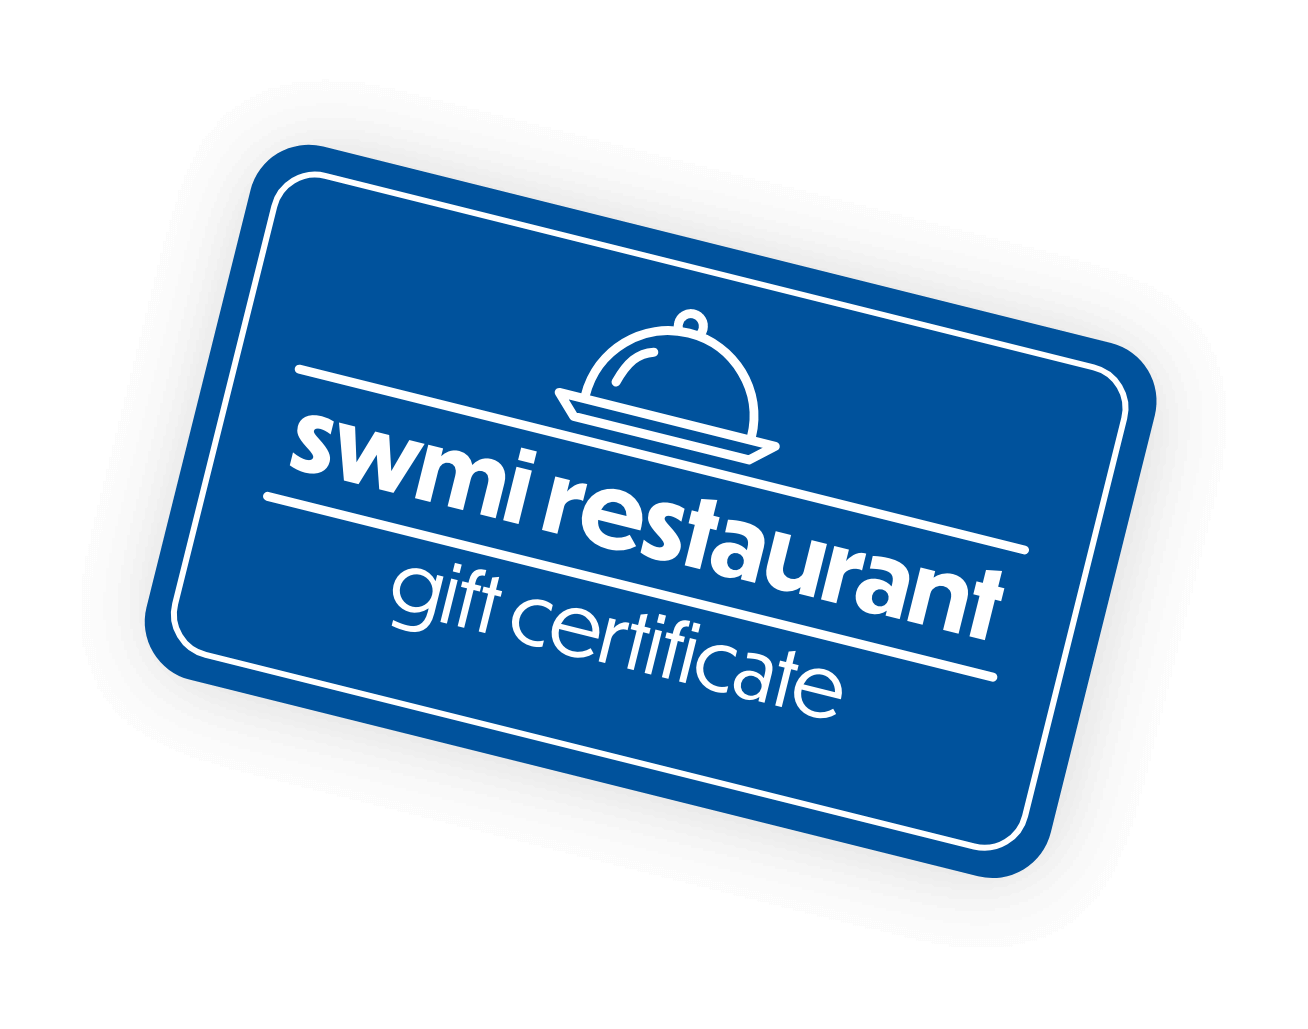 Graphic of a gift certificate for a southwest Michigan restaurant.